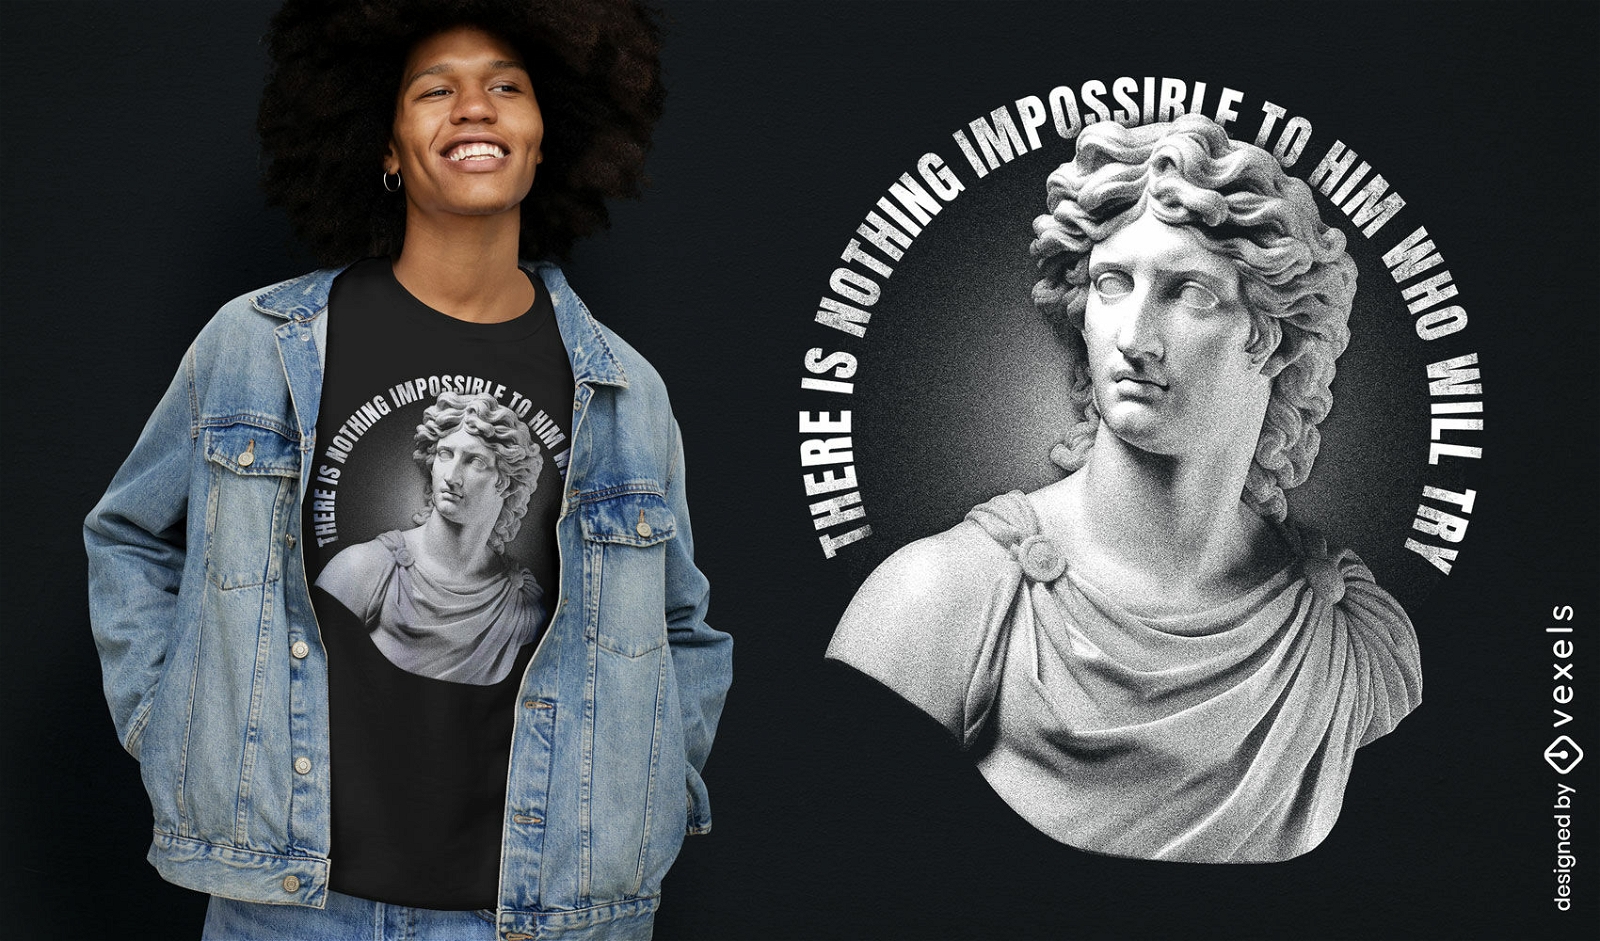 Alexander the Great quote t-shirt design